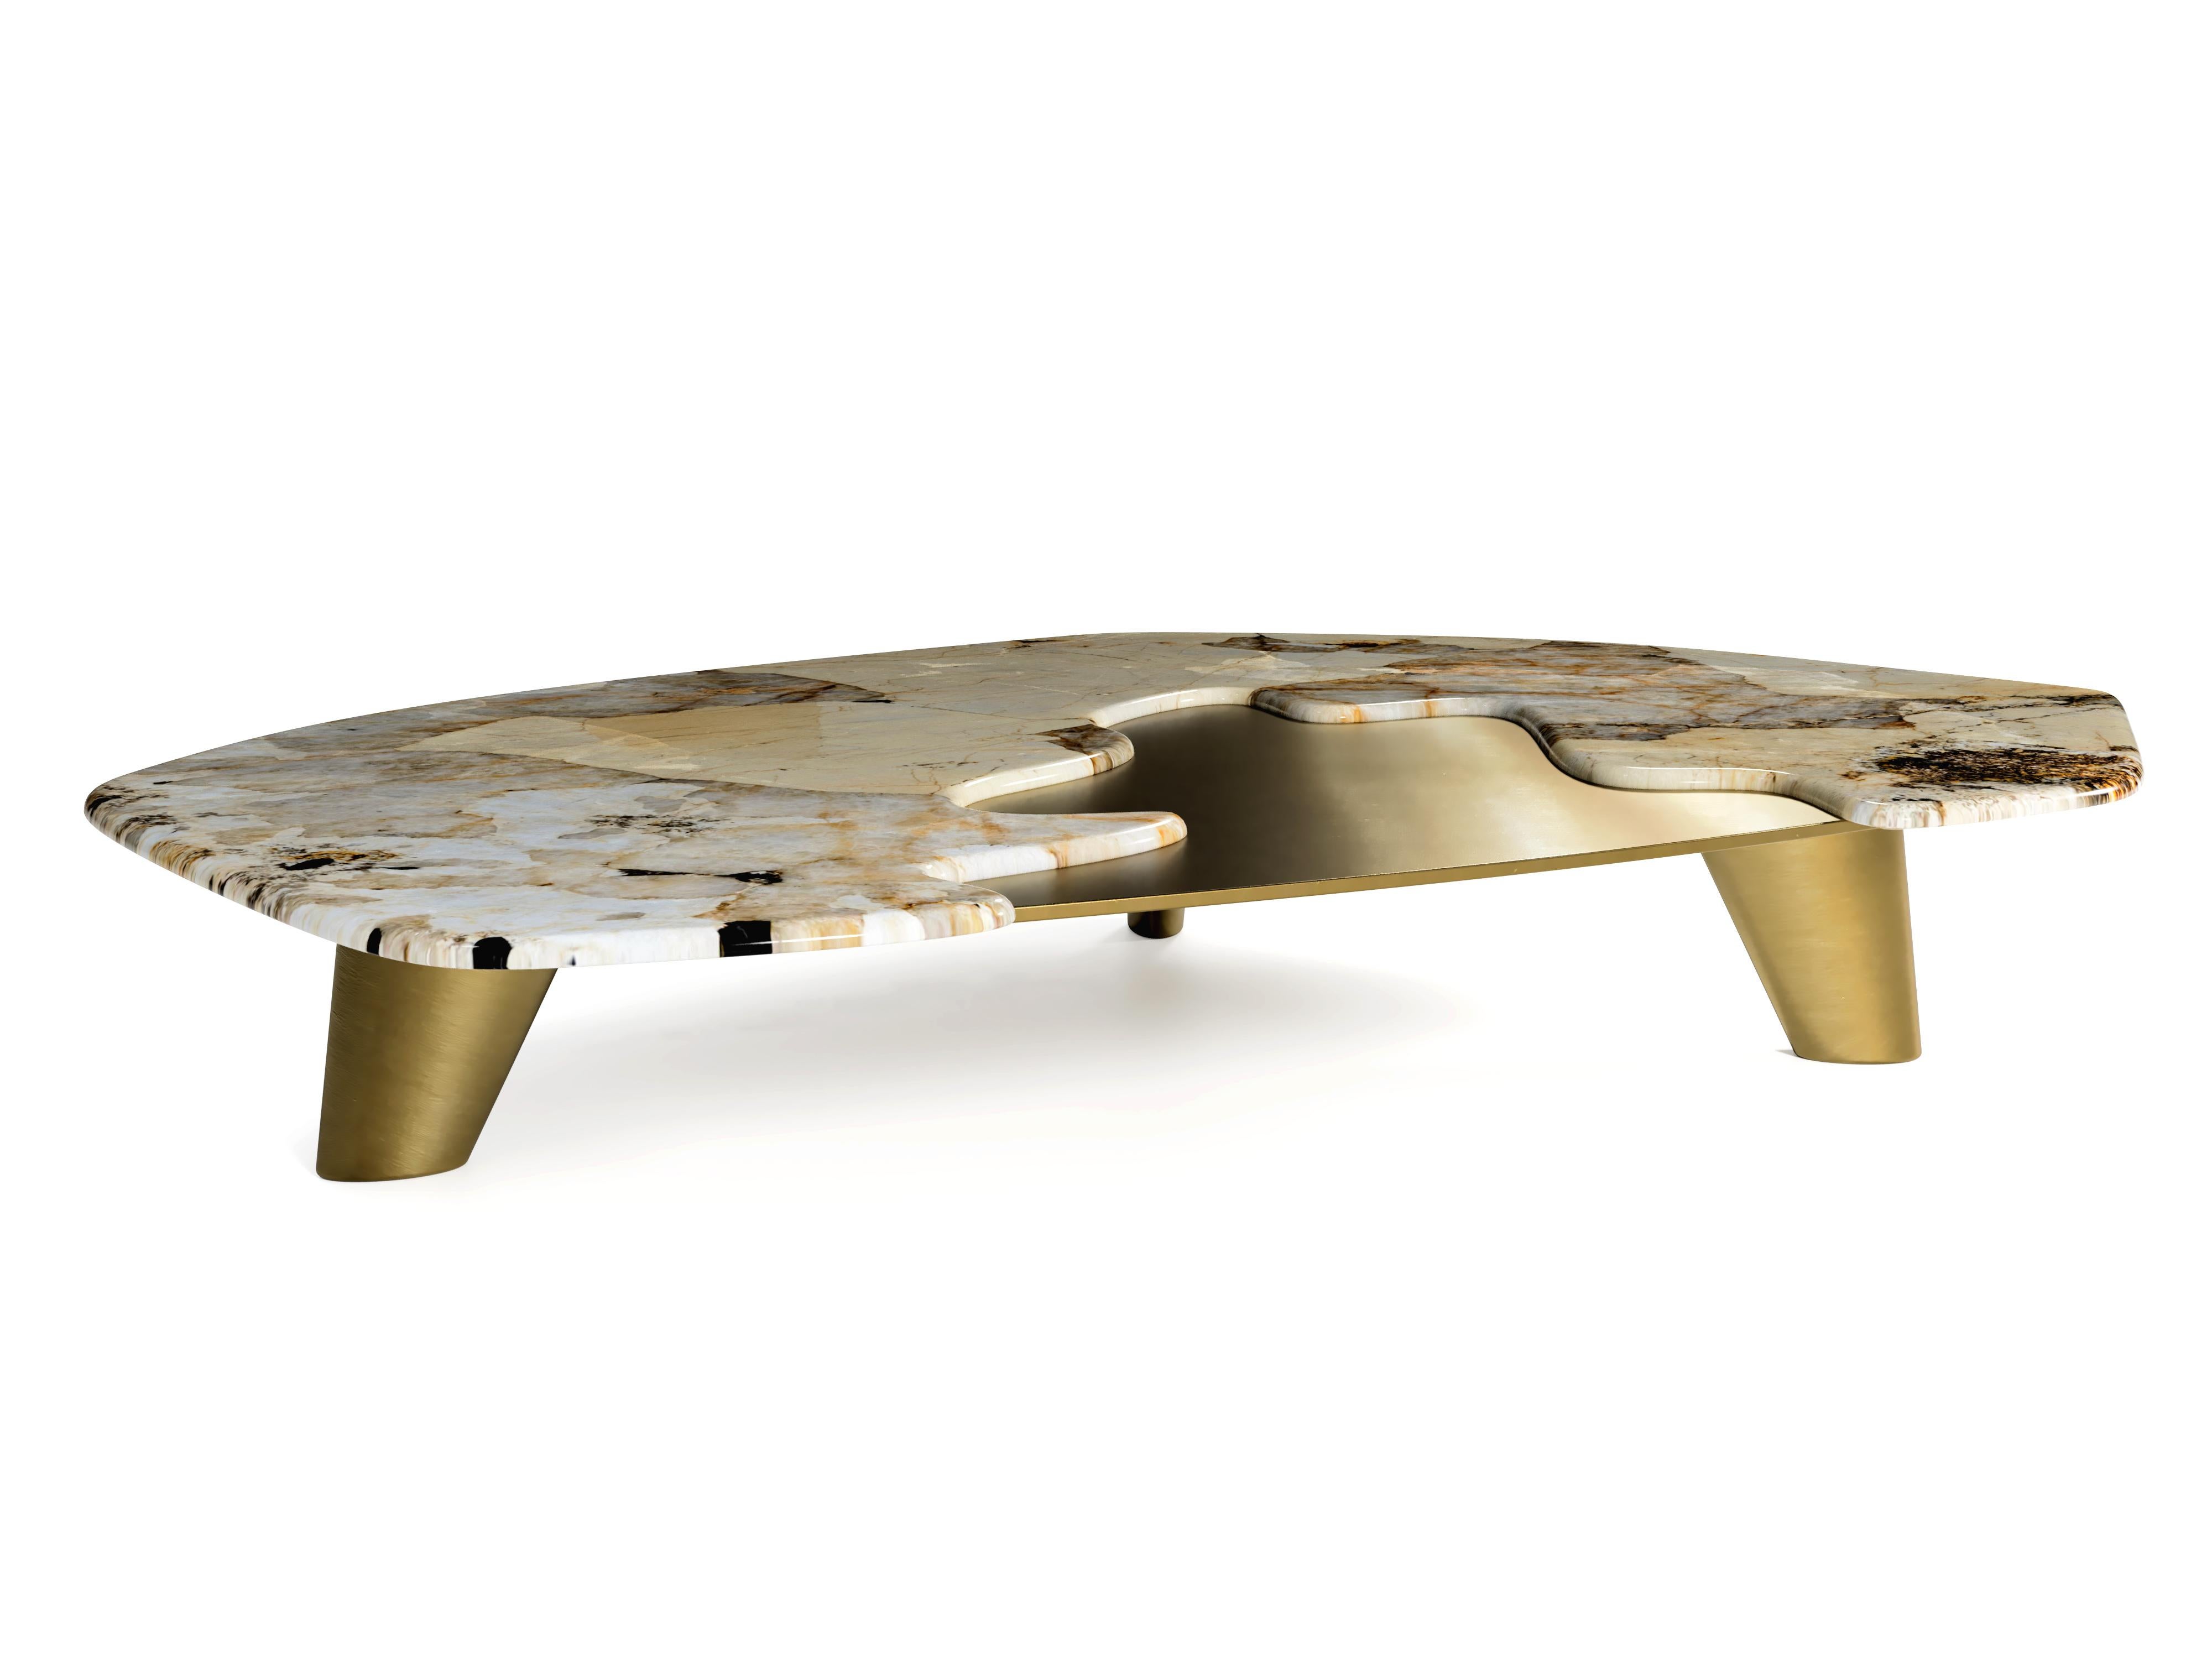 “The Elements IV” Contemporary Center Coffee Table ft. natural quartzite Patagonia and solid brass plate in brushed finish.

Created of the two totally different shapes, structures reveals some symbiotic influence between each other. One delicate -